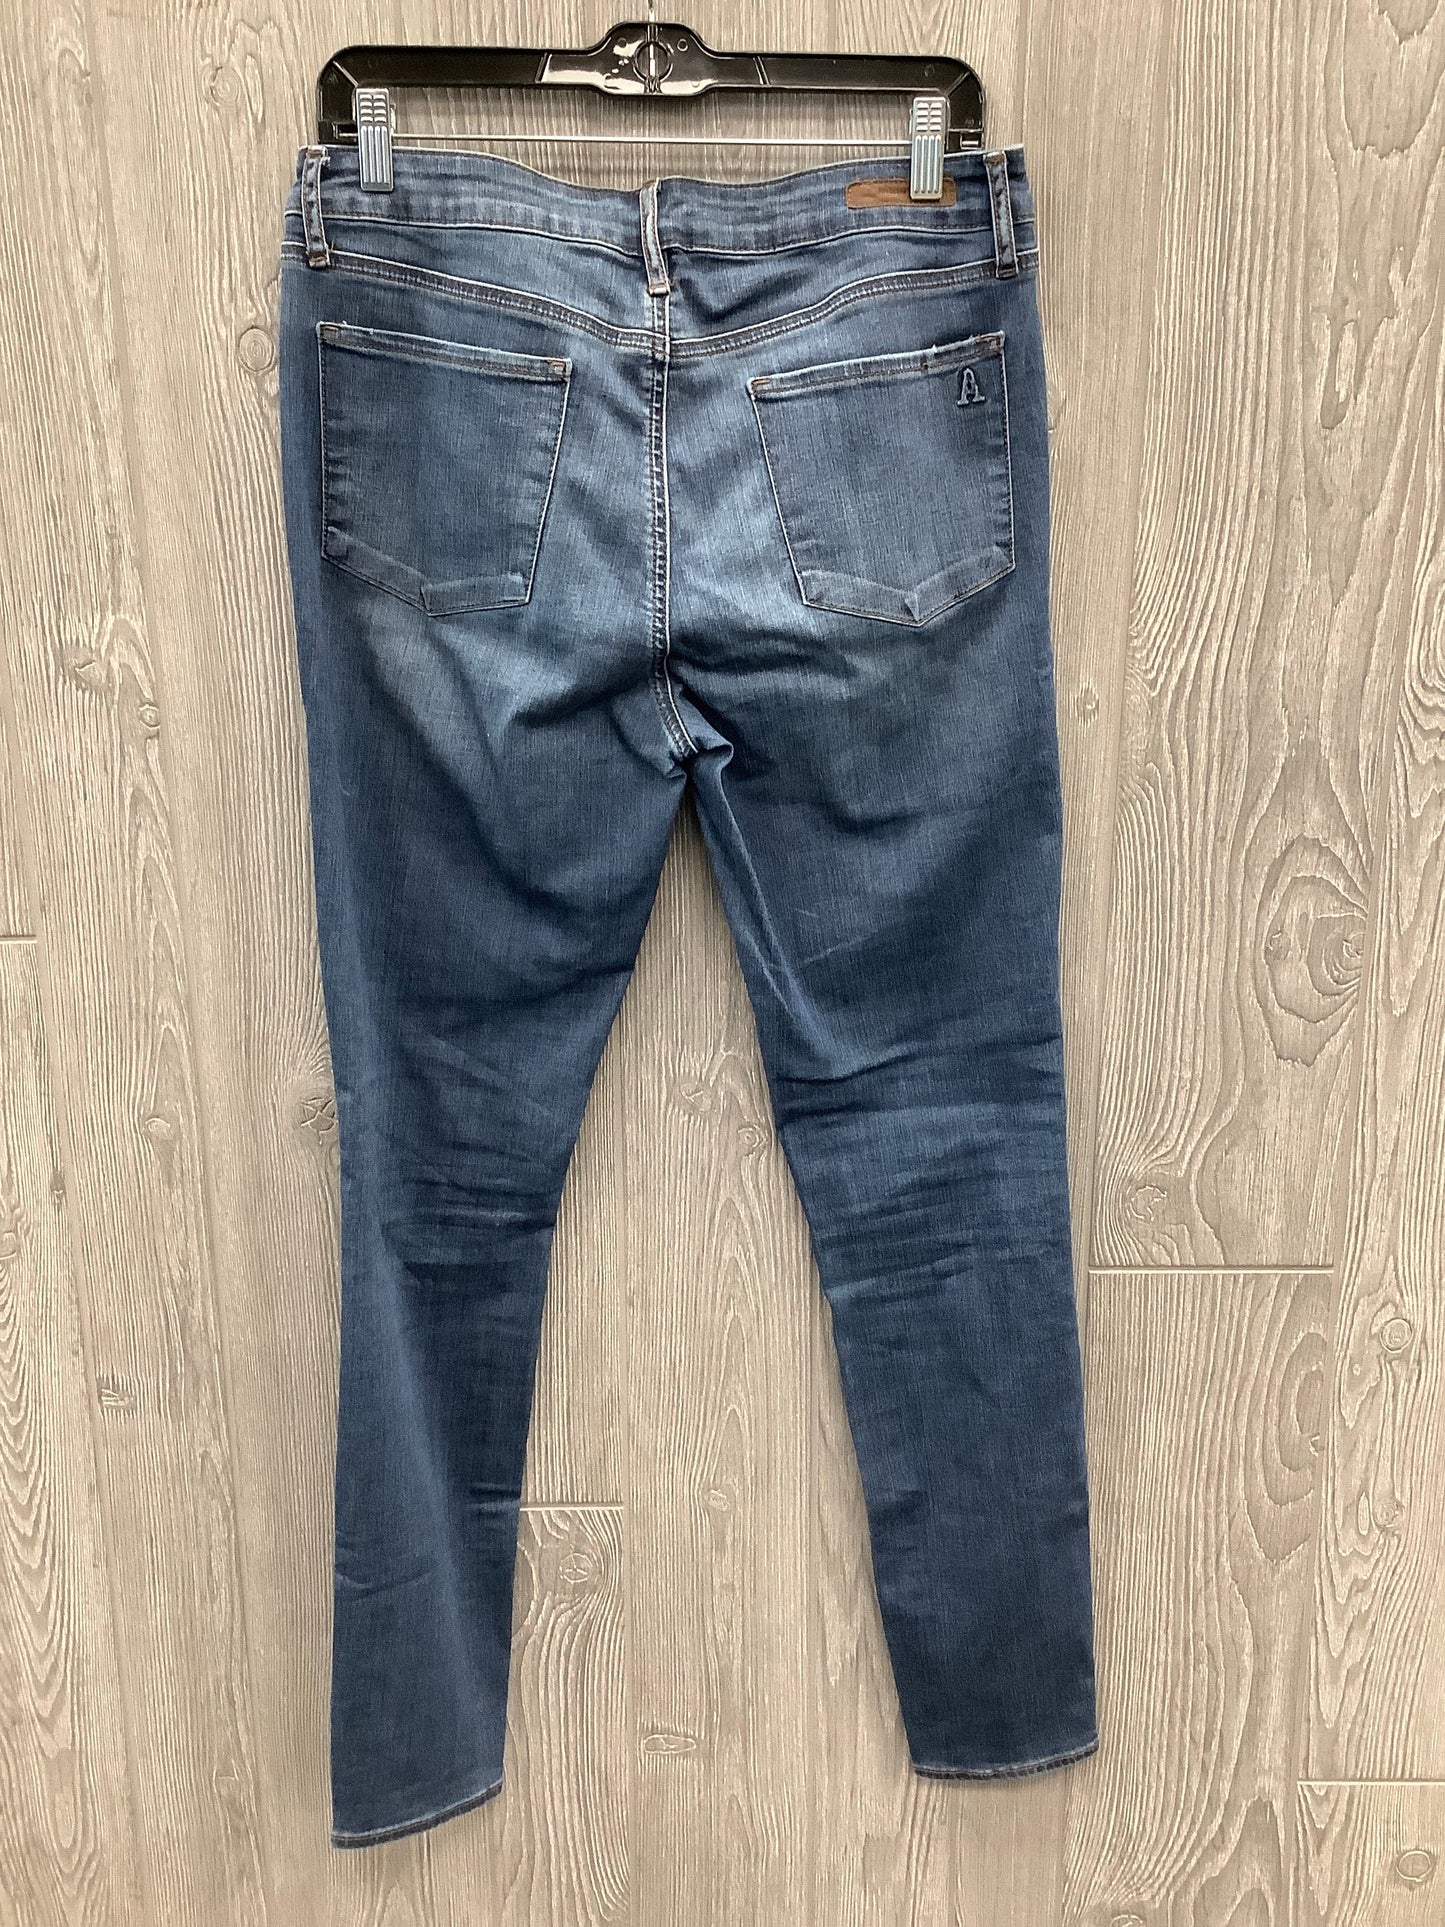 Jeans Skinny By Articles Of Society  Size: 10